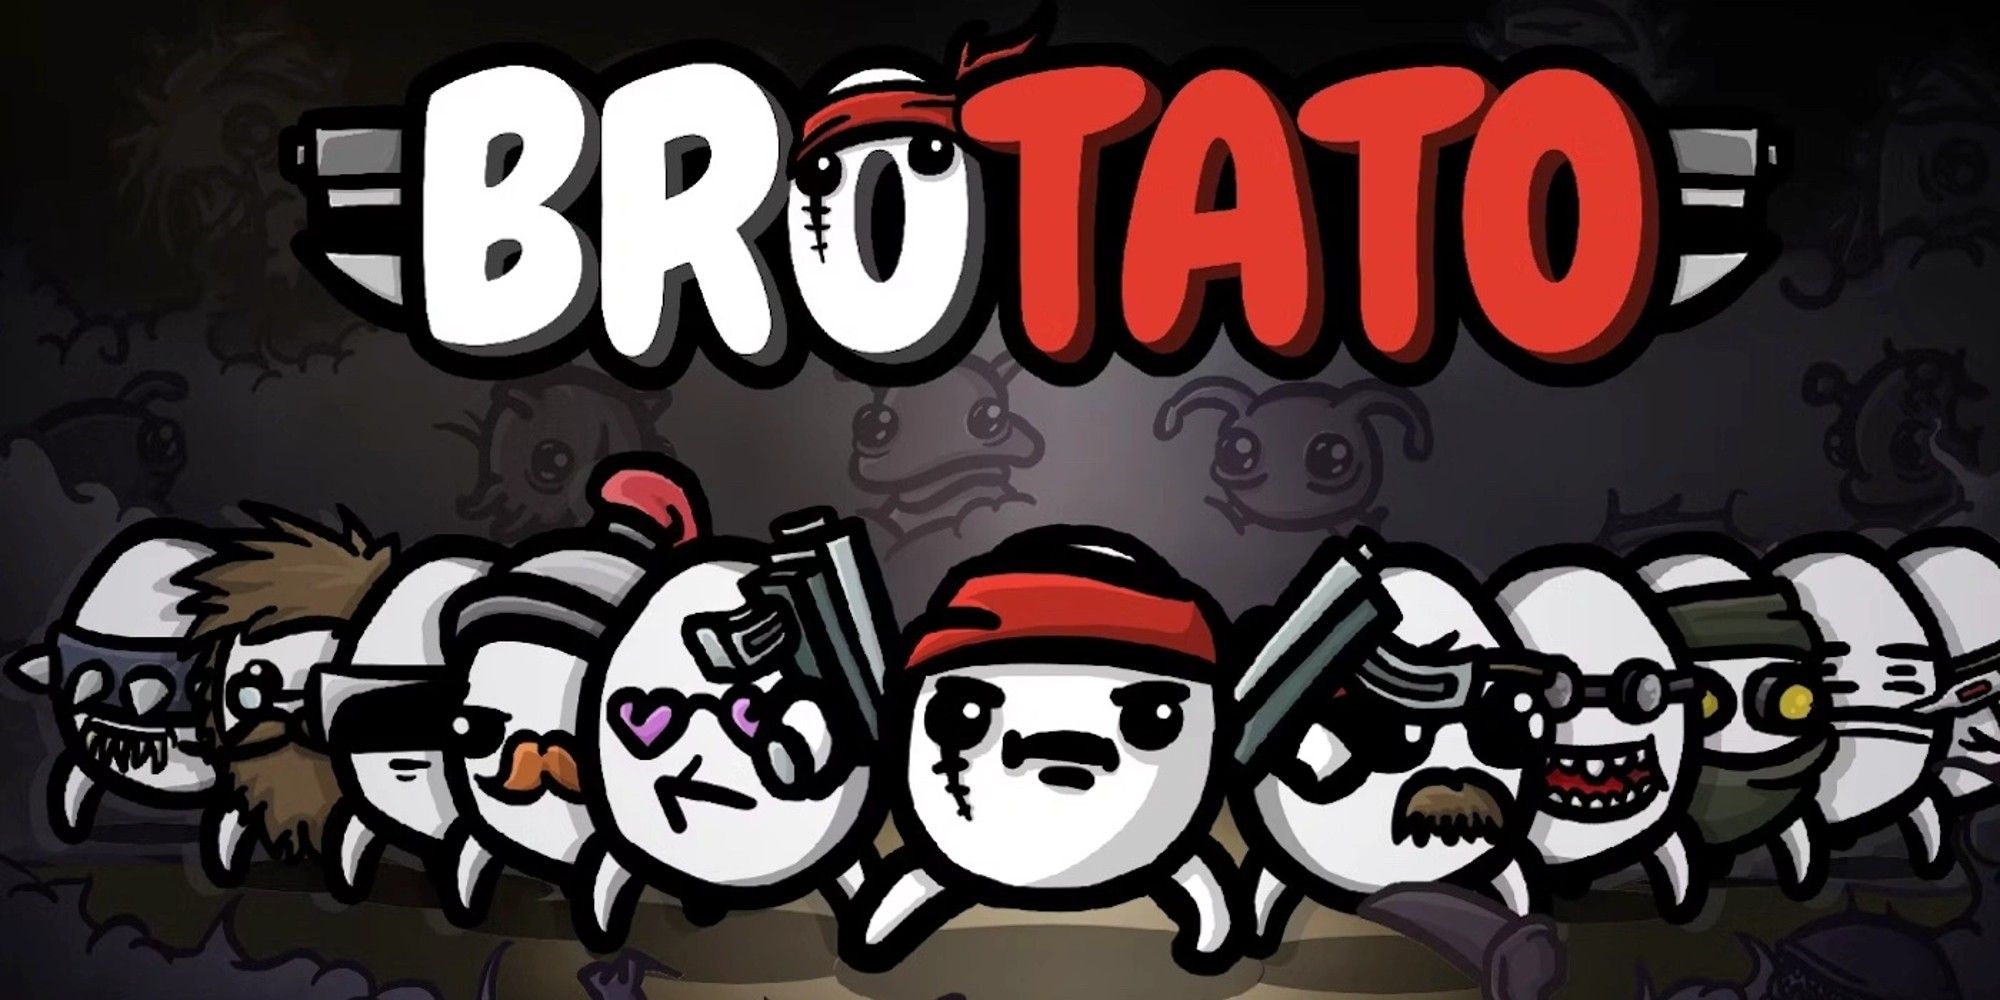 Brotato title screen showing Brotato's various forms